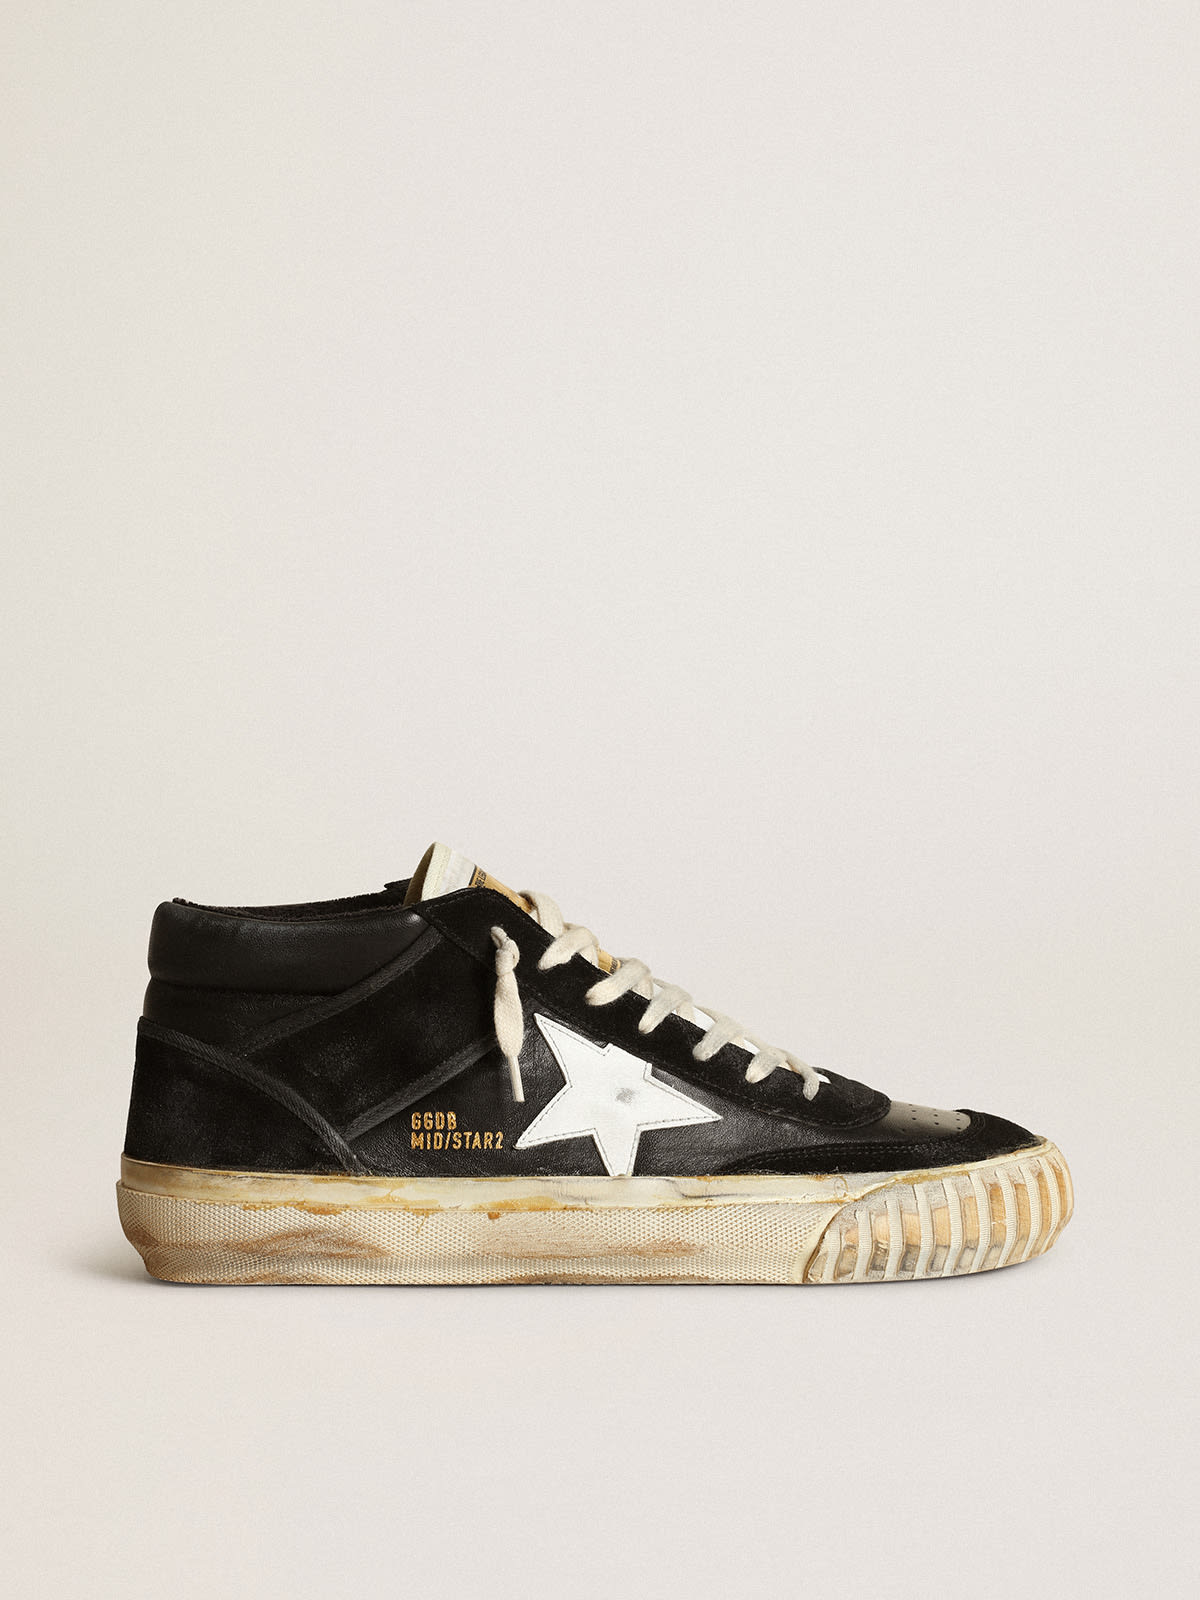 Men’s Mid Star in black nappa and suede with white leather star